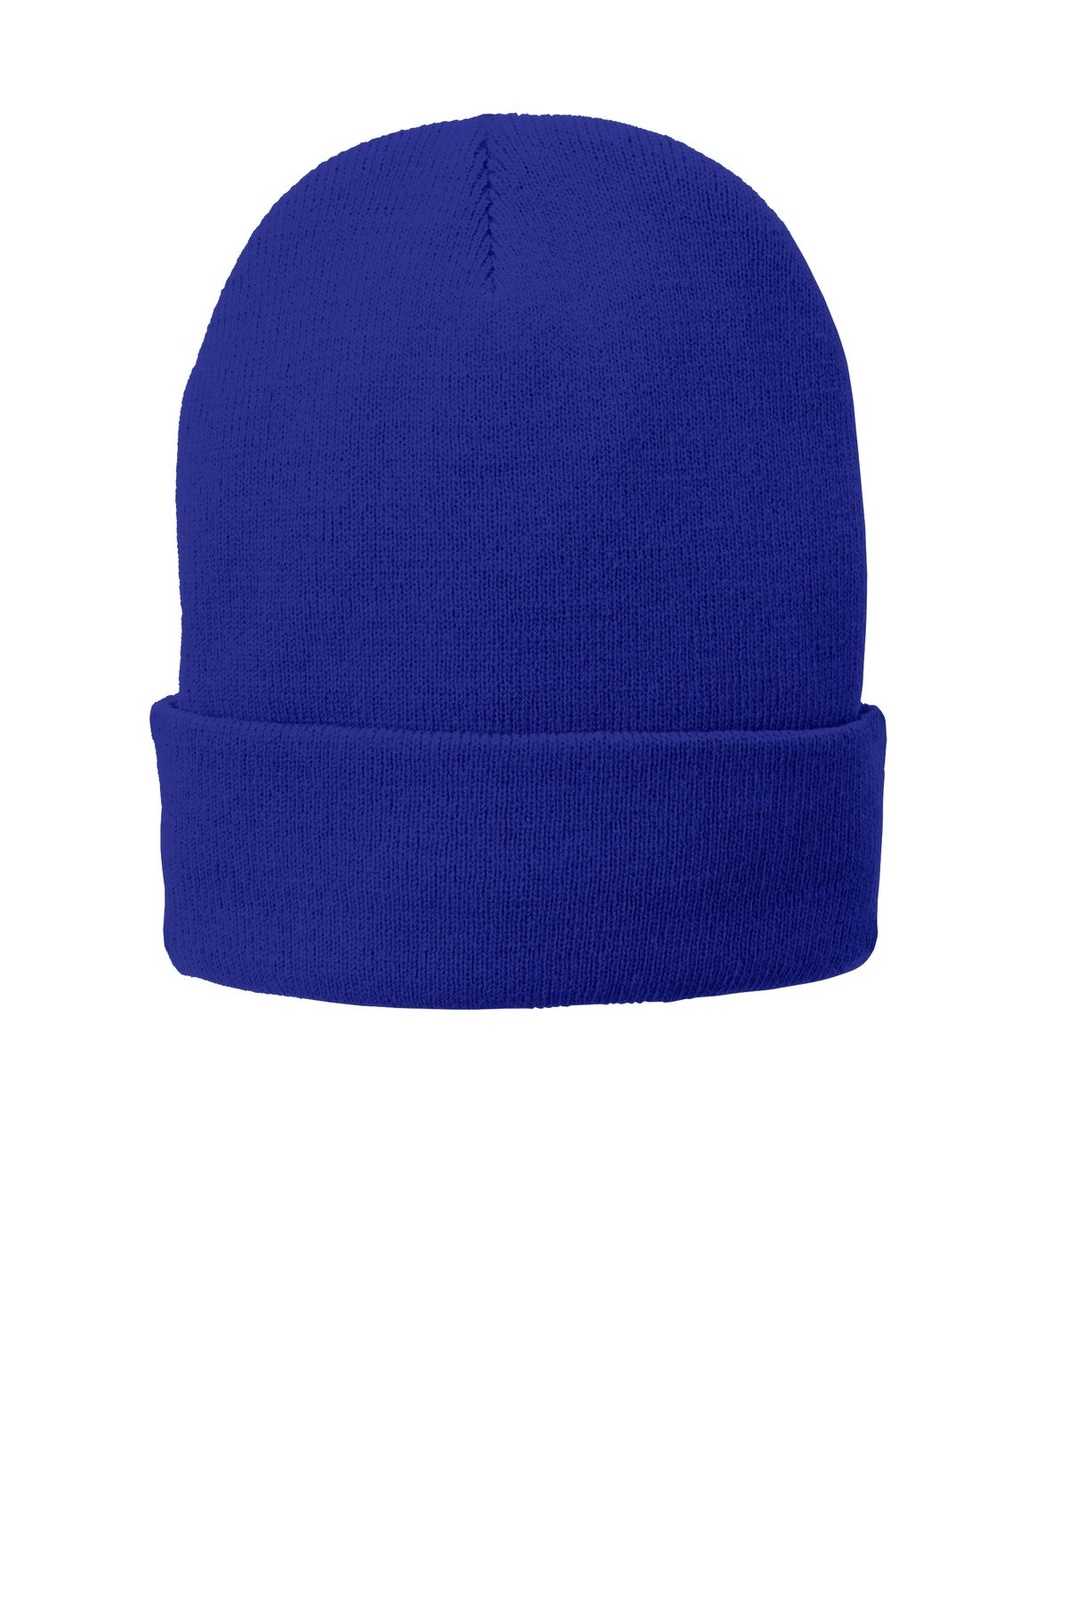 Port & Company CP90L Fleece-Lined Knit Cap with Cuff - Athletic Royal - HIT a Double - 1